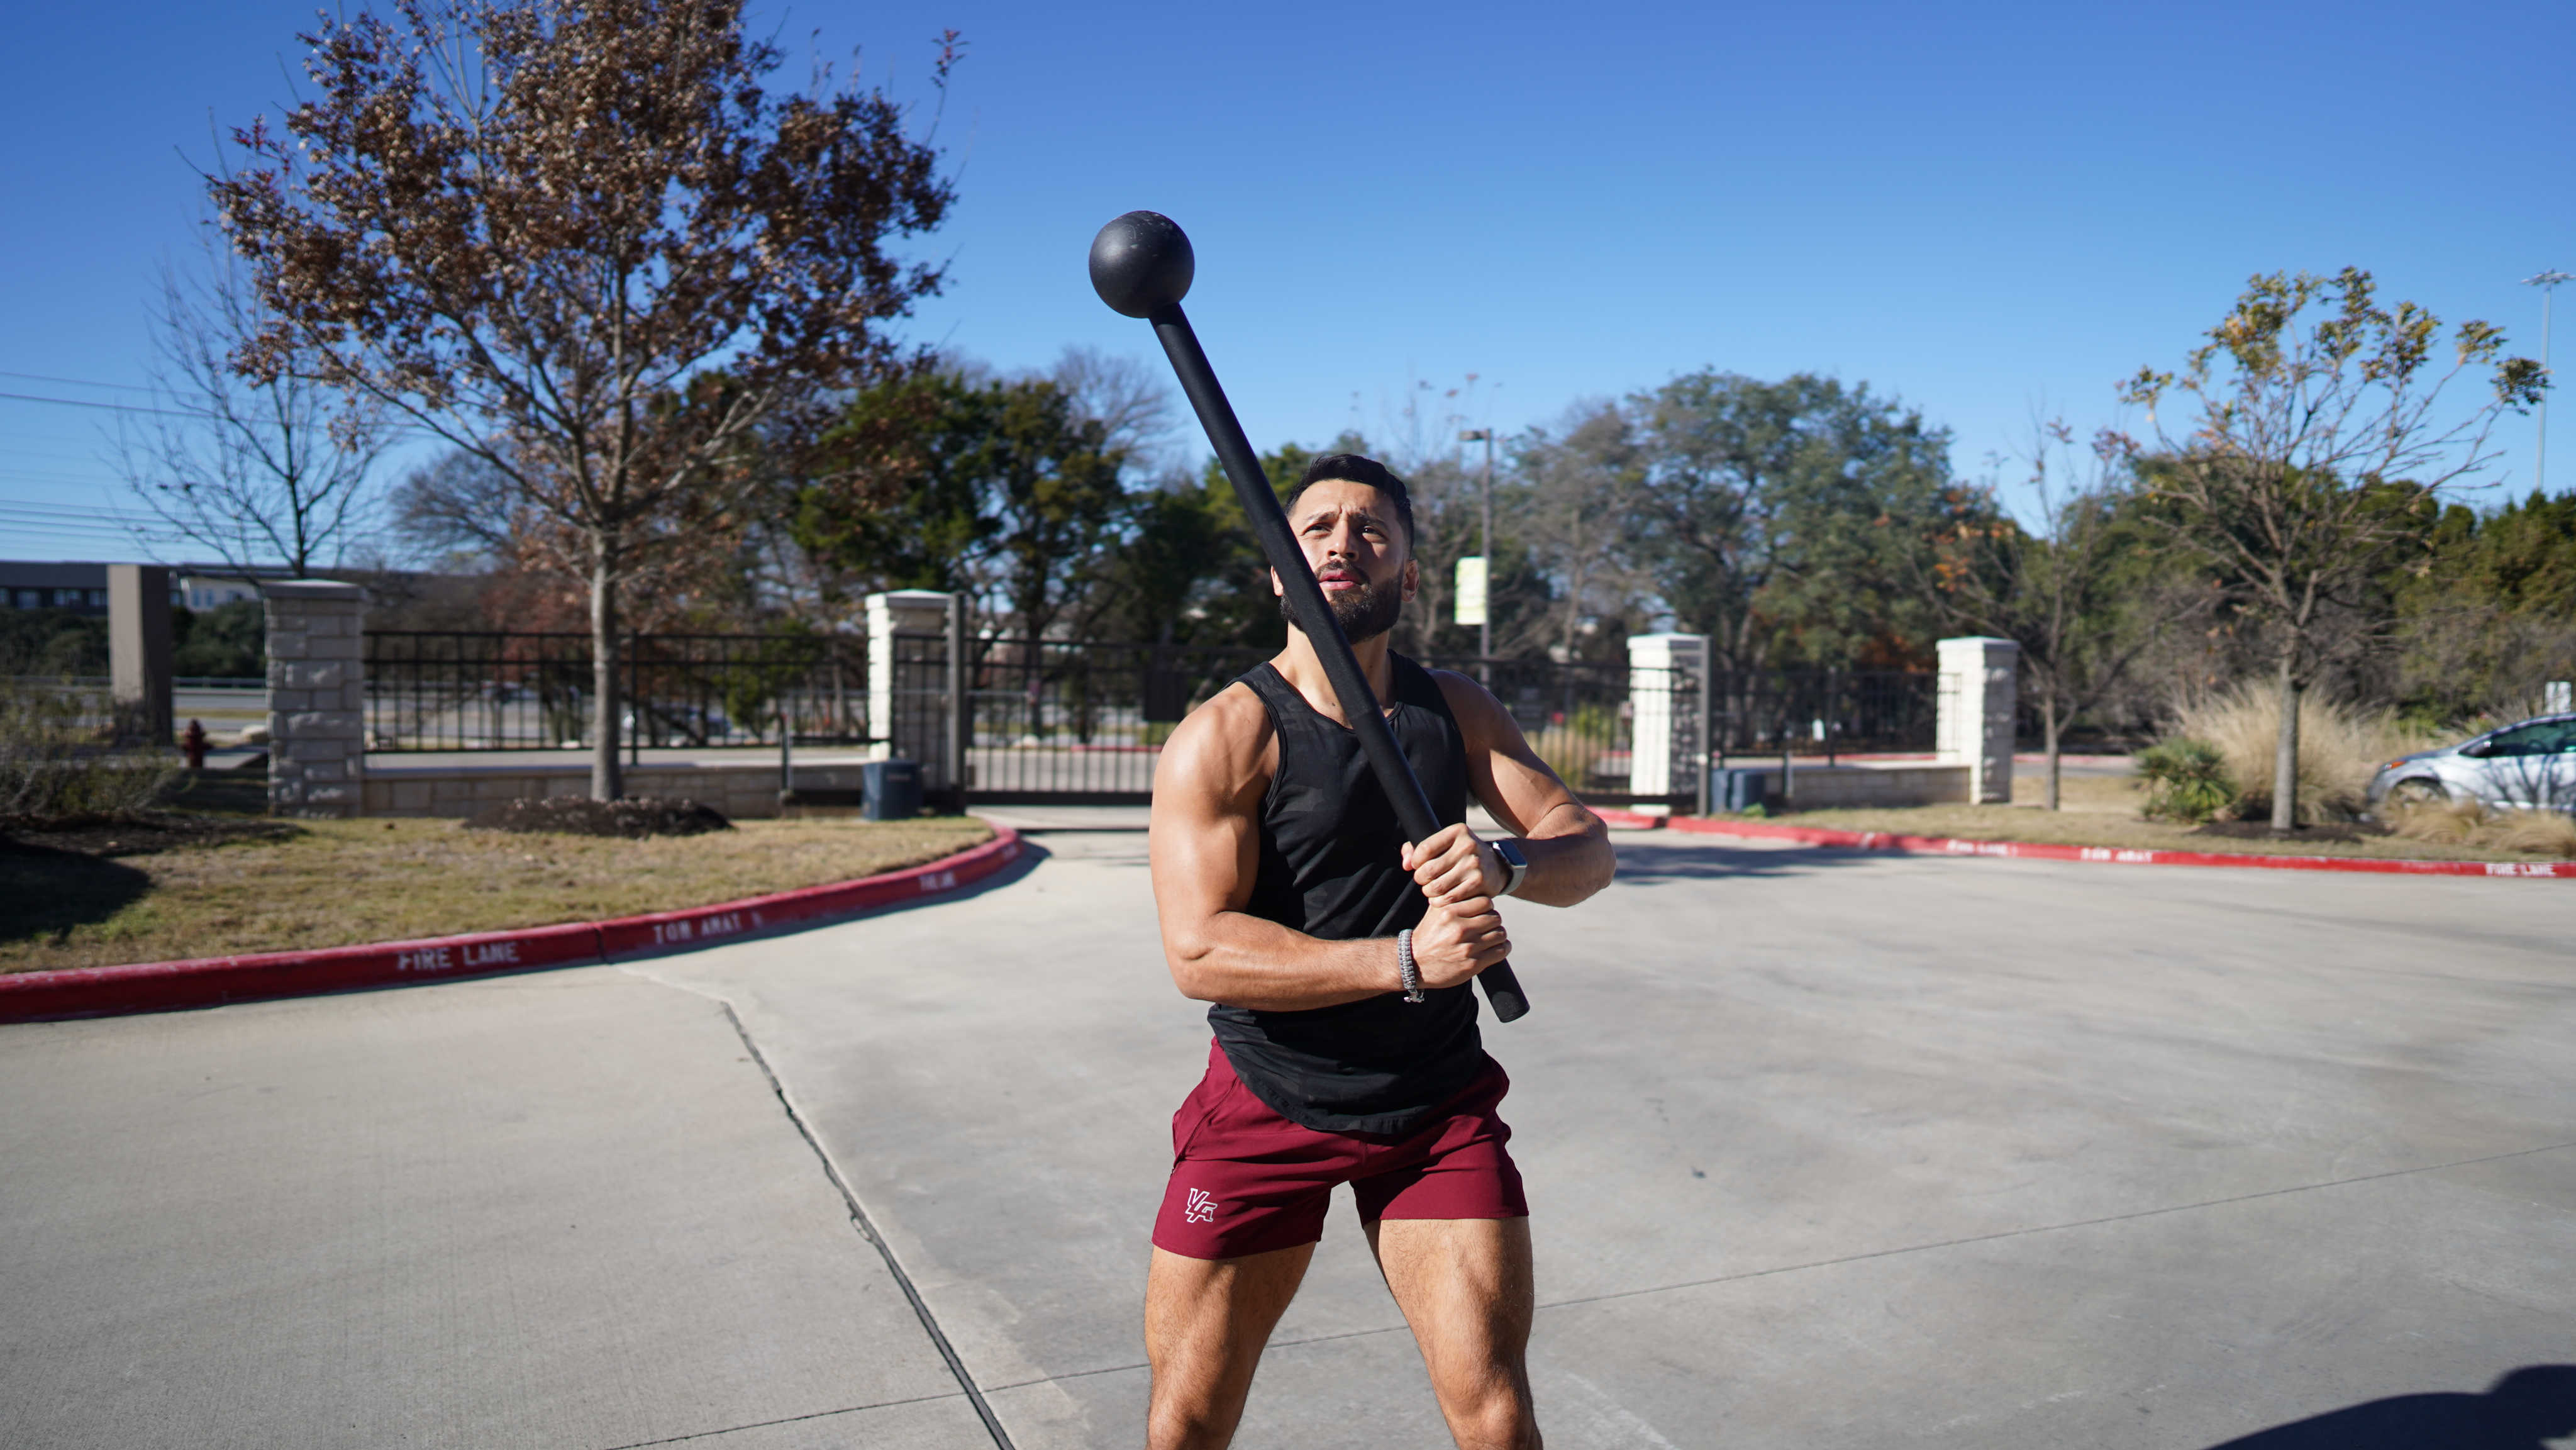 The steel mace is an unconventional tool to get an extraordinary workout